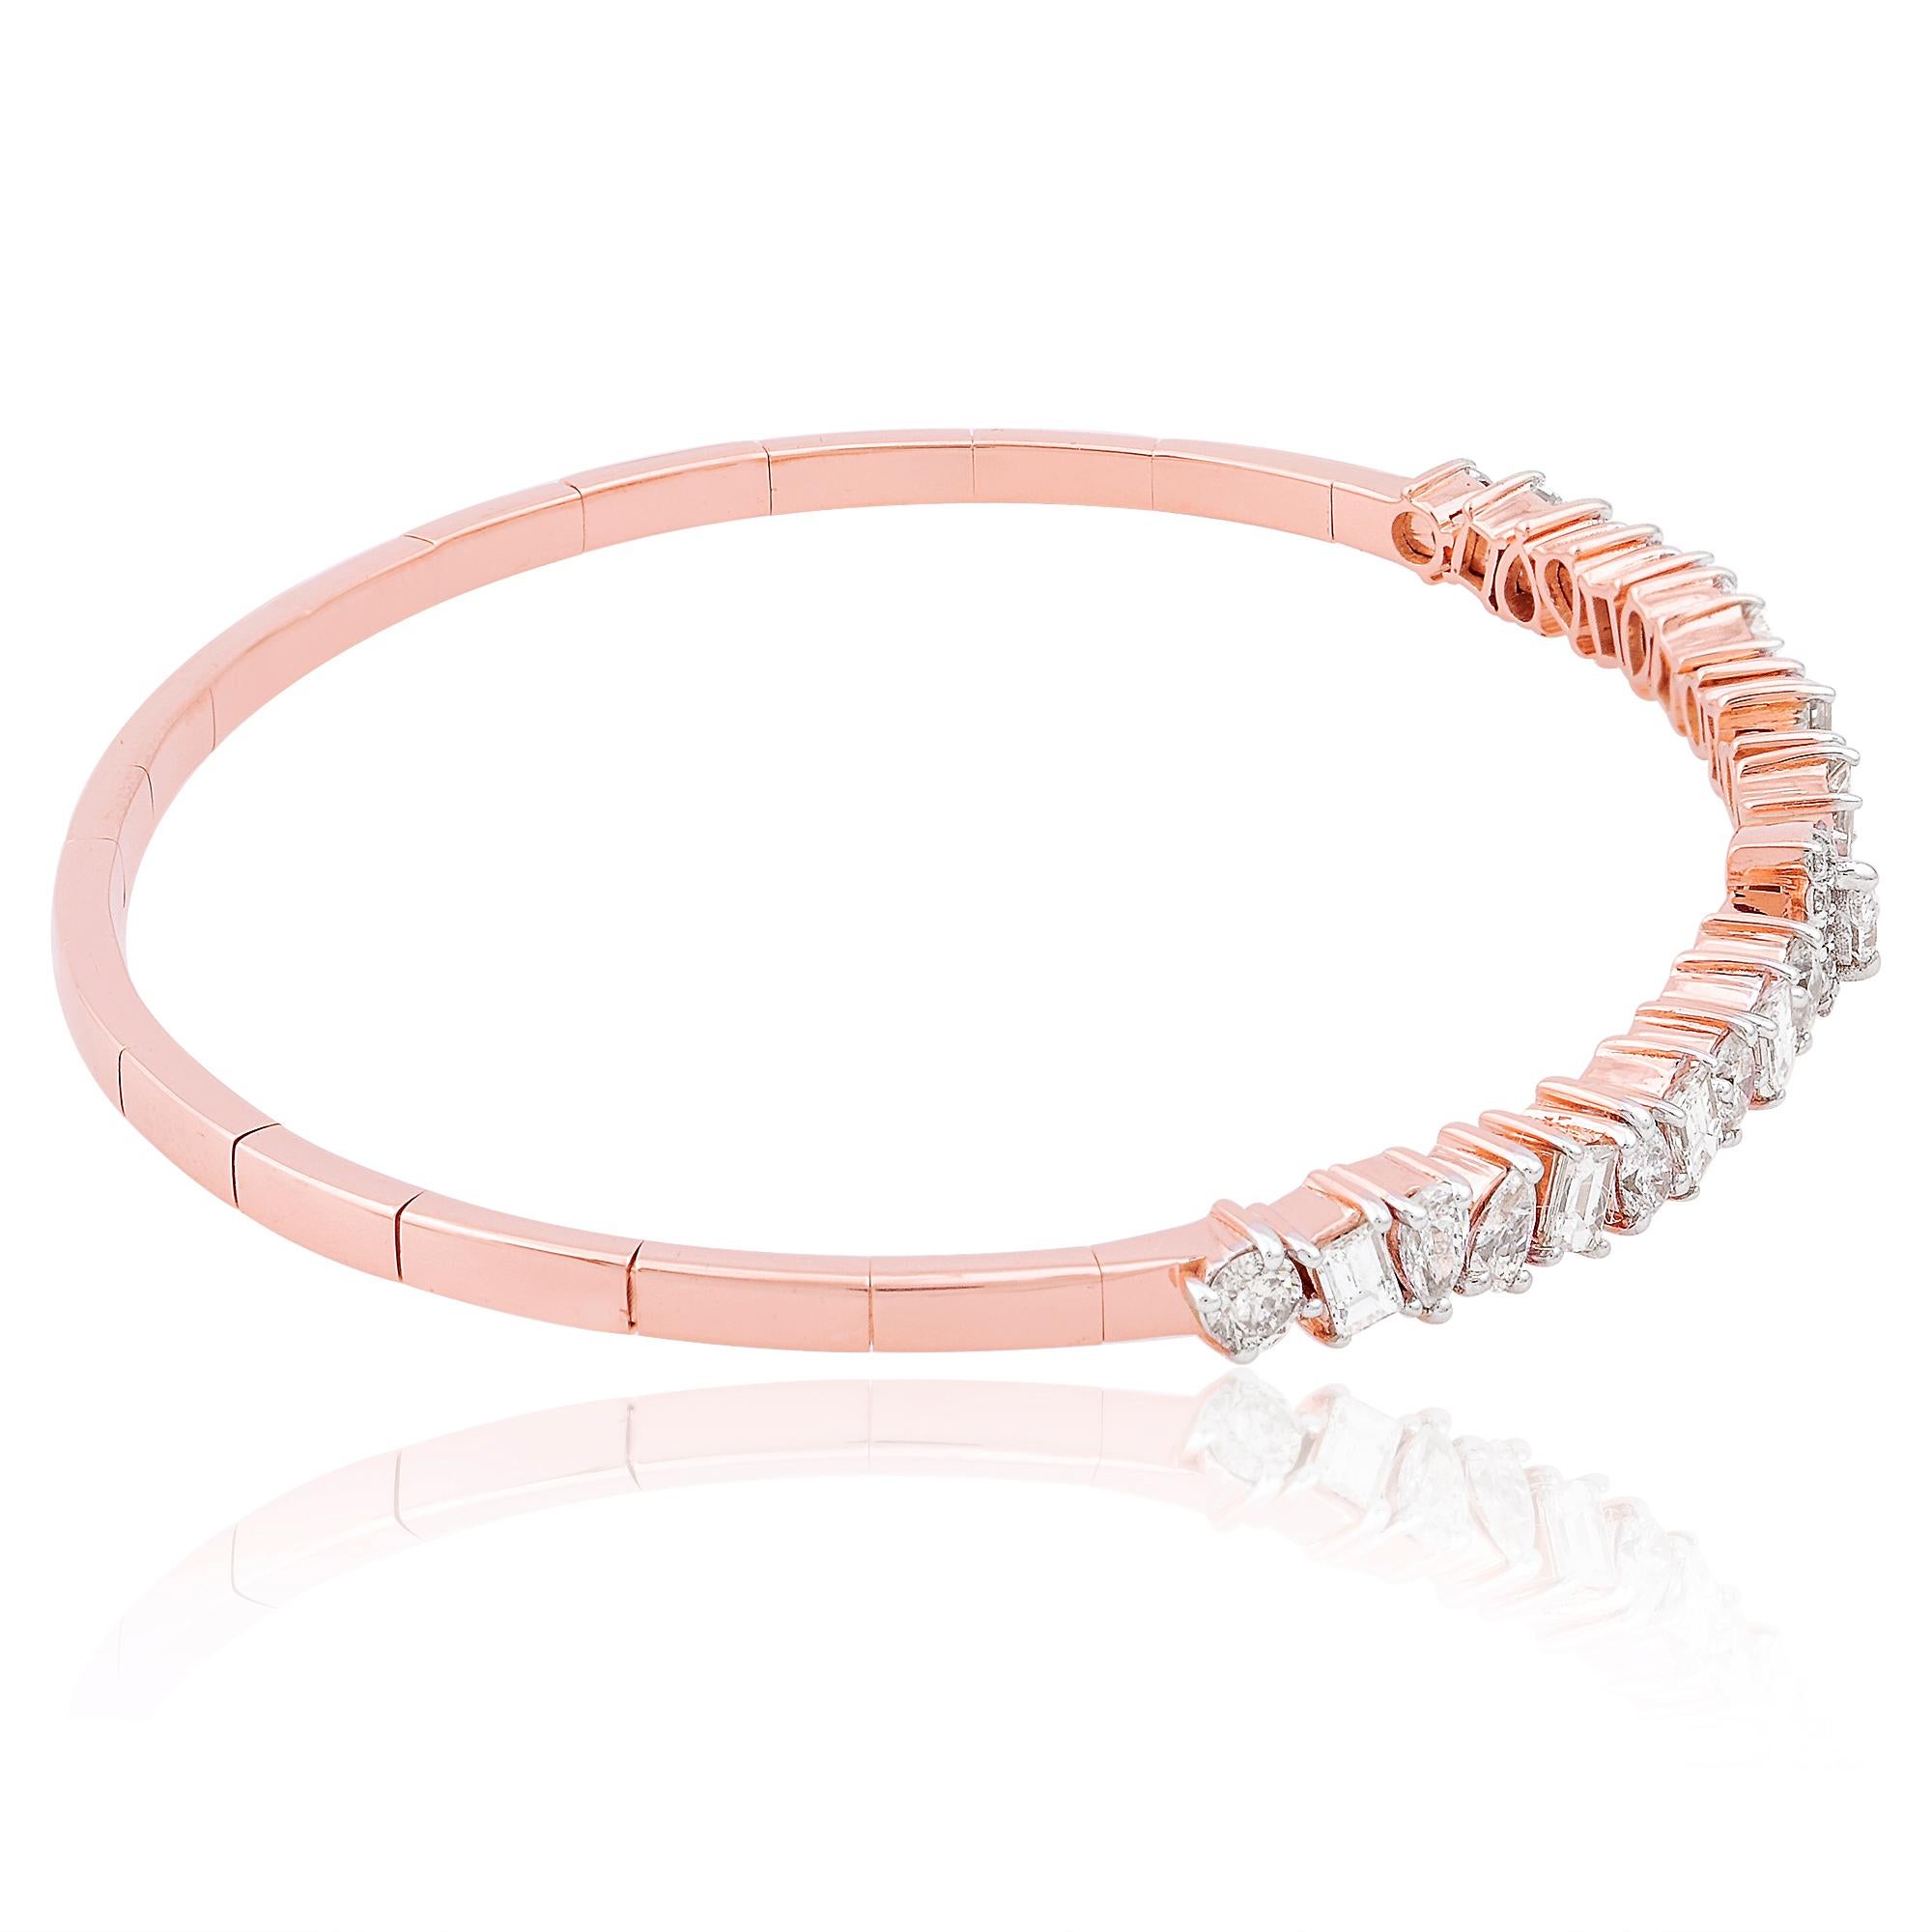 The bangle itself is a testament to superior craftsmanship, with its sleek, curved silhouette designed to gracefully encircle the wrist. The lustrous rose gold band exudes a subtle glow, enhancing the beauty of the diamond and adding a touch of